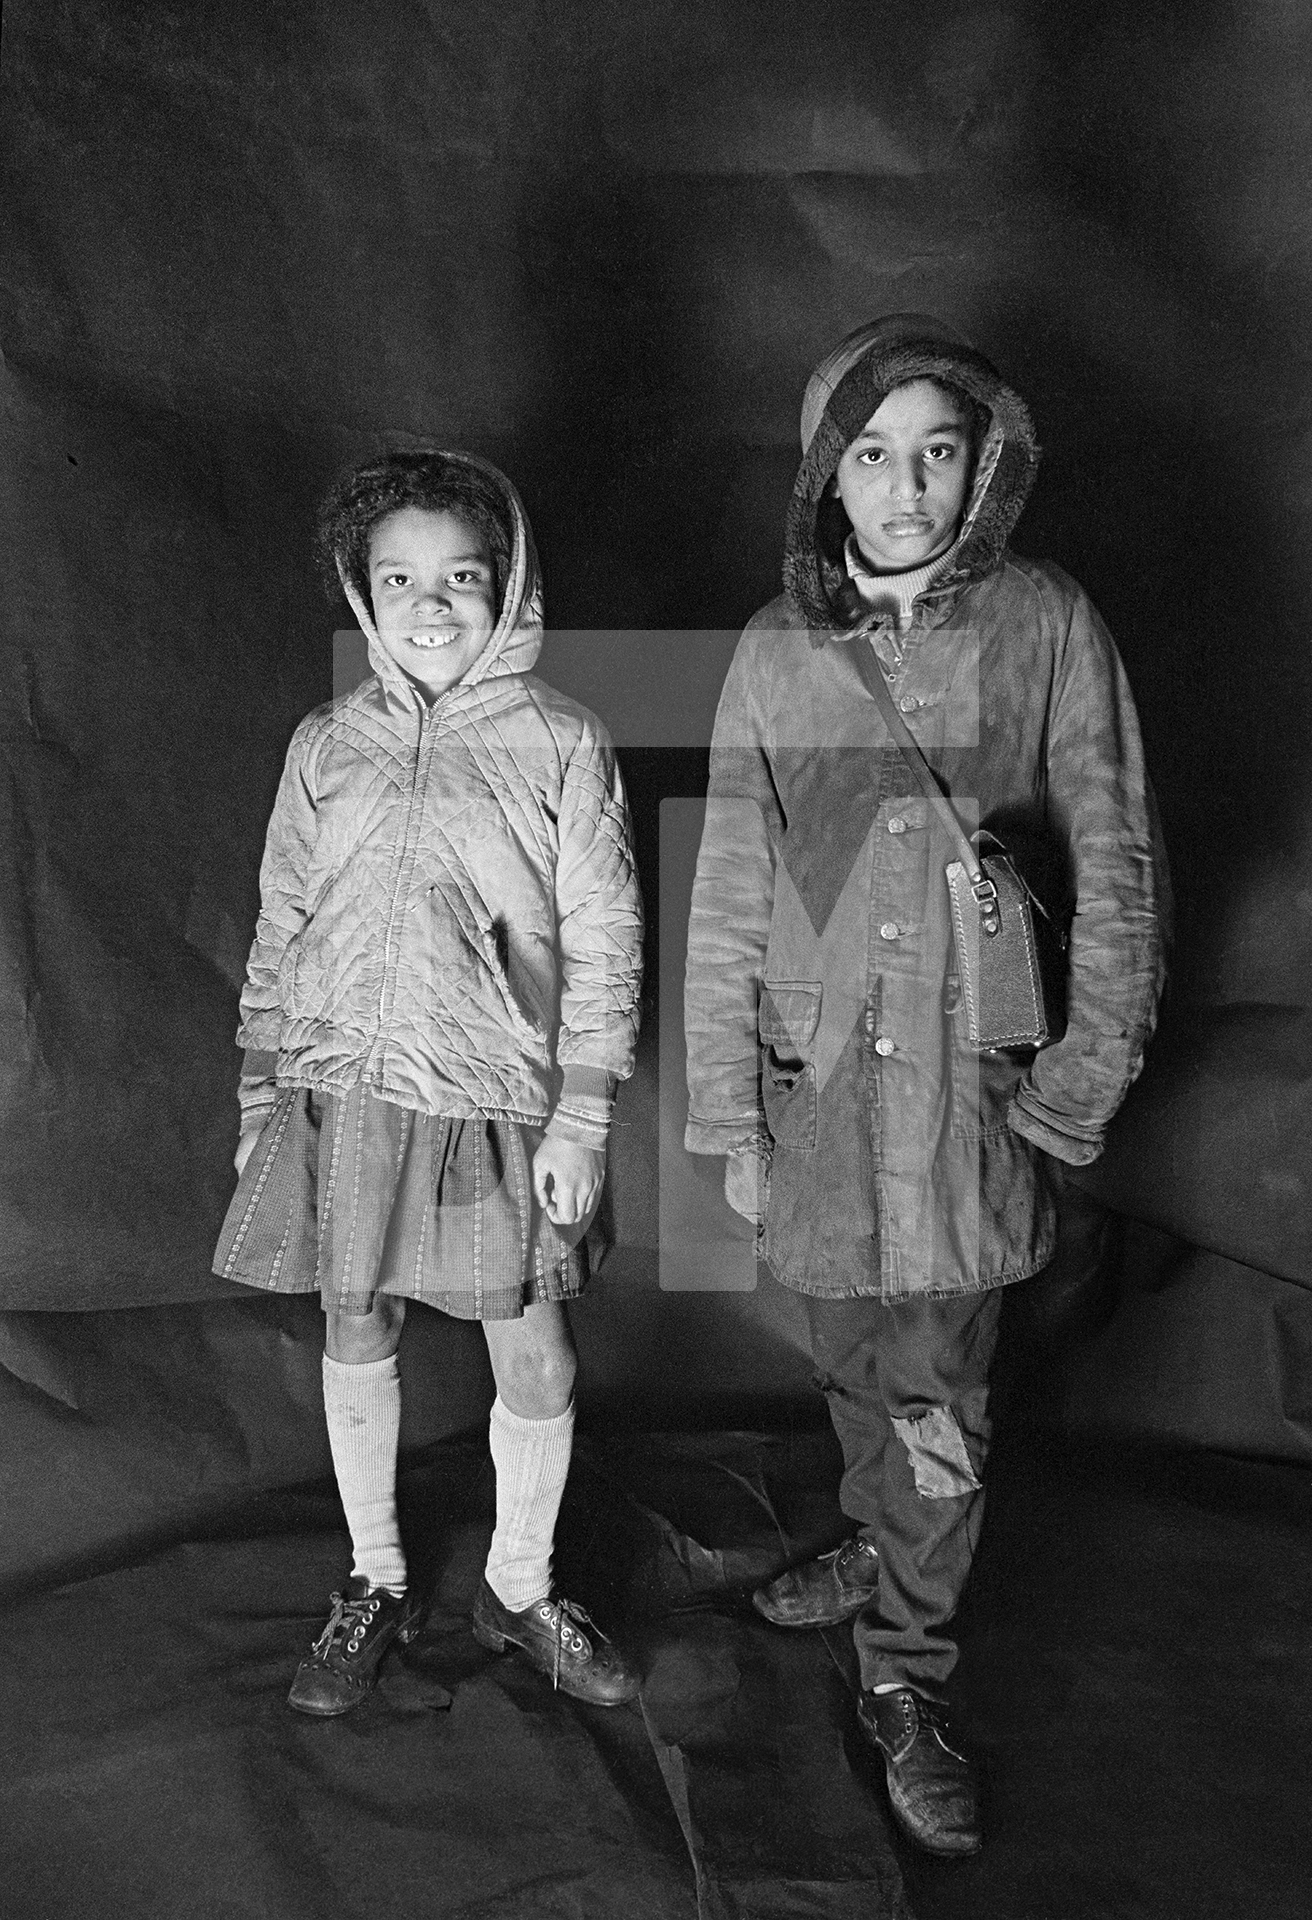 Angela Loretta Lindsey, aged 8, with her brother Mark Emanuel Lindsey. Portrait from The Shop on Greame Street, Moss Side, Manchester. February-April 1972 by Daniel Meadows